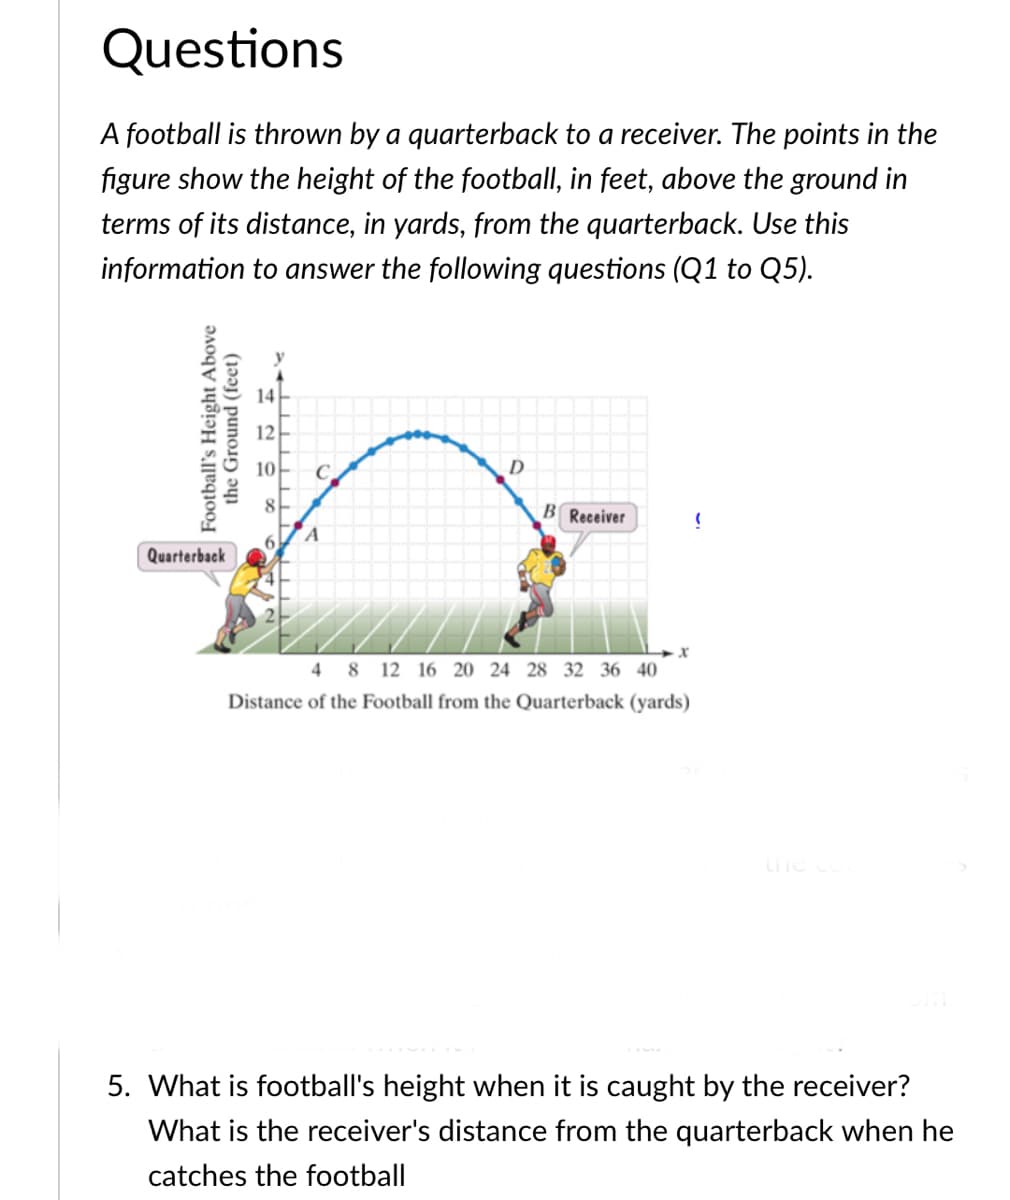 Questions
A football is thrown by a quarterback to a receiver. The points in the
figure show the height of the football, in feet, above the ground in
terms of its distance, in yards, from the quarterback. Use this
information to answer the following questions (Q1 to Q5).
10-
C.
D
8-
BReceiver
Quarterback
4 8 12 16 20 24 28 32 36 40
Distance of the Football from the Quarterback (yards)
5. What is football's height when it is caught by the receiver?
What is the receiver's distance from the quarterback when he
catches the football
Football's Height Above
the Ground (feet)
